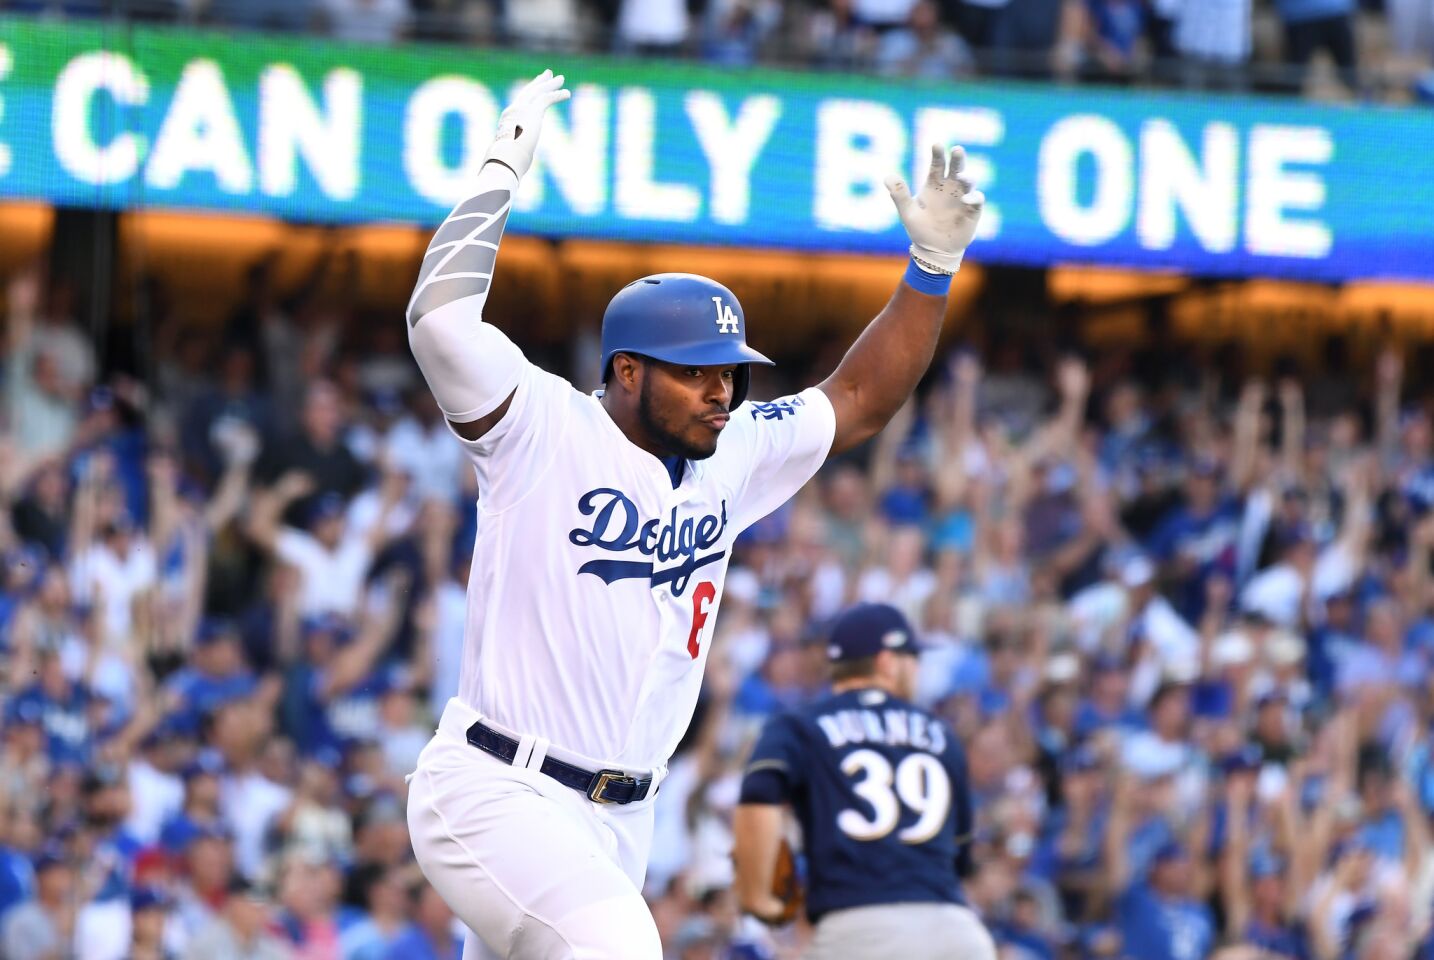 Dodgers pinch hitter Yasiel Puig celebrates his RBI single against the Brewers inthe 6th inning.